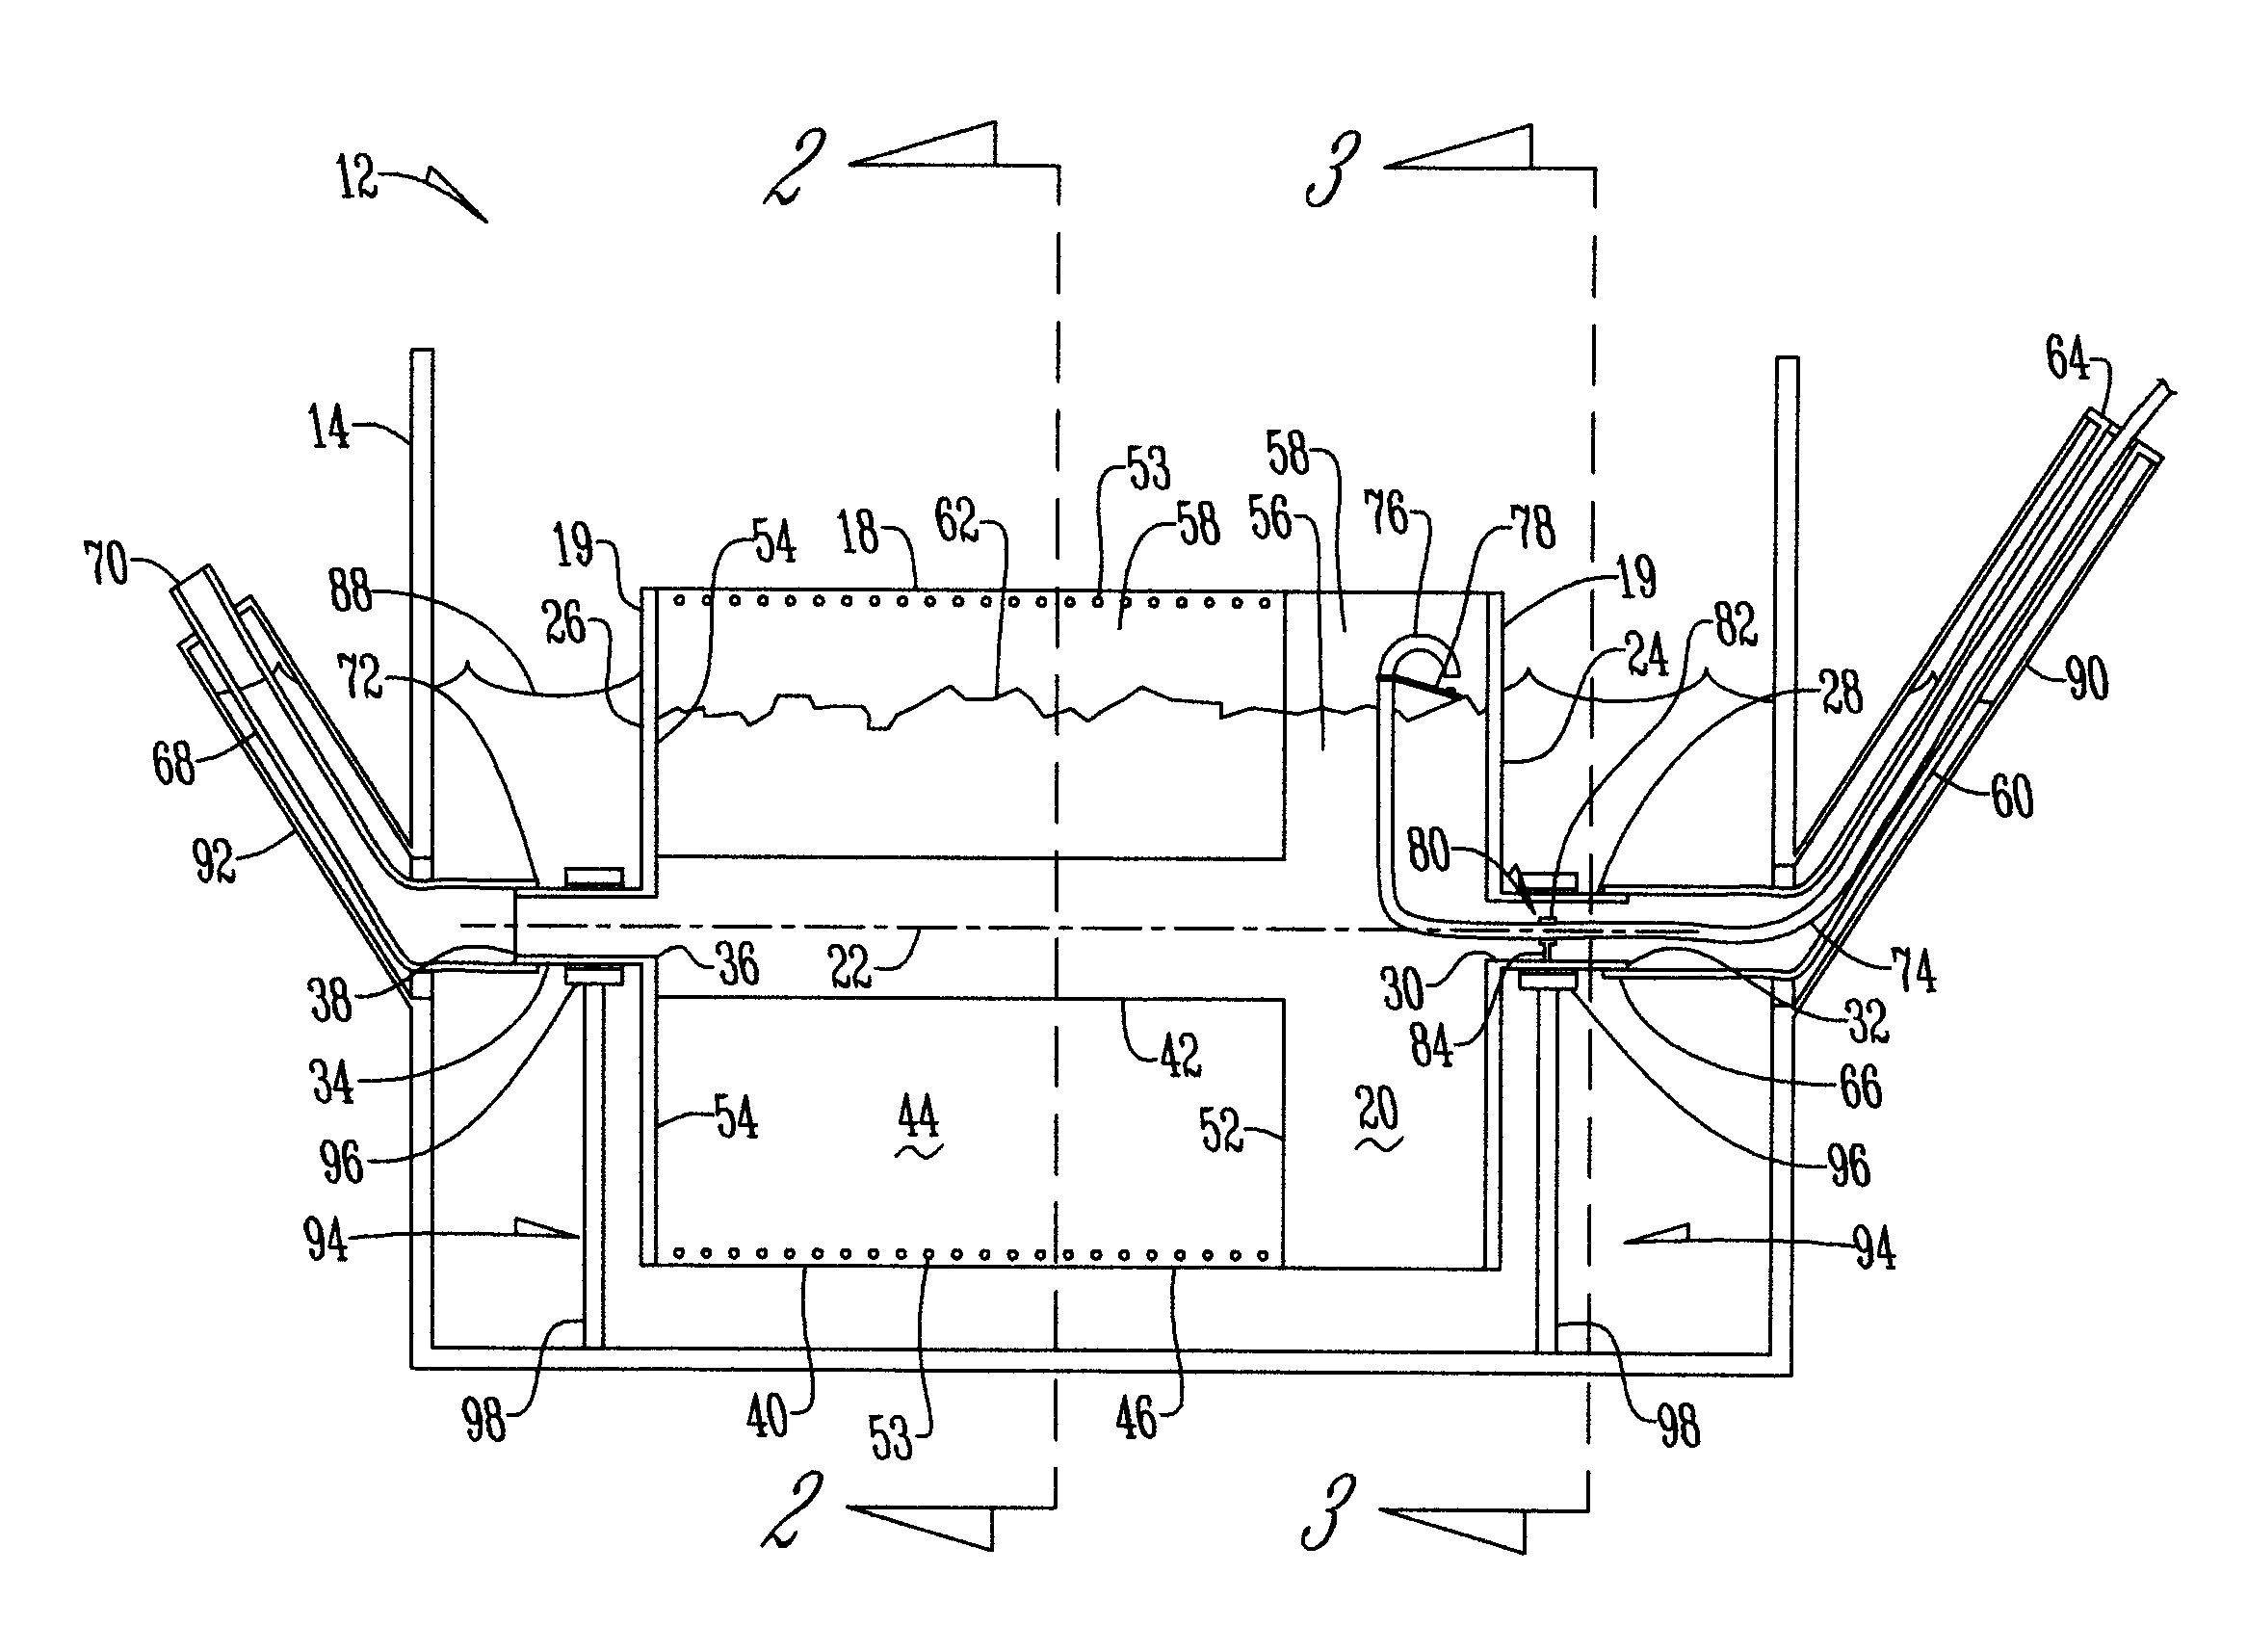 Apparatus and method of using an agricultural waste digester and biogas generation system